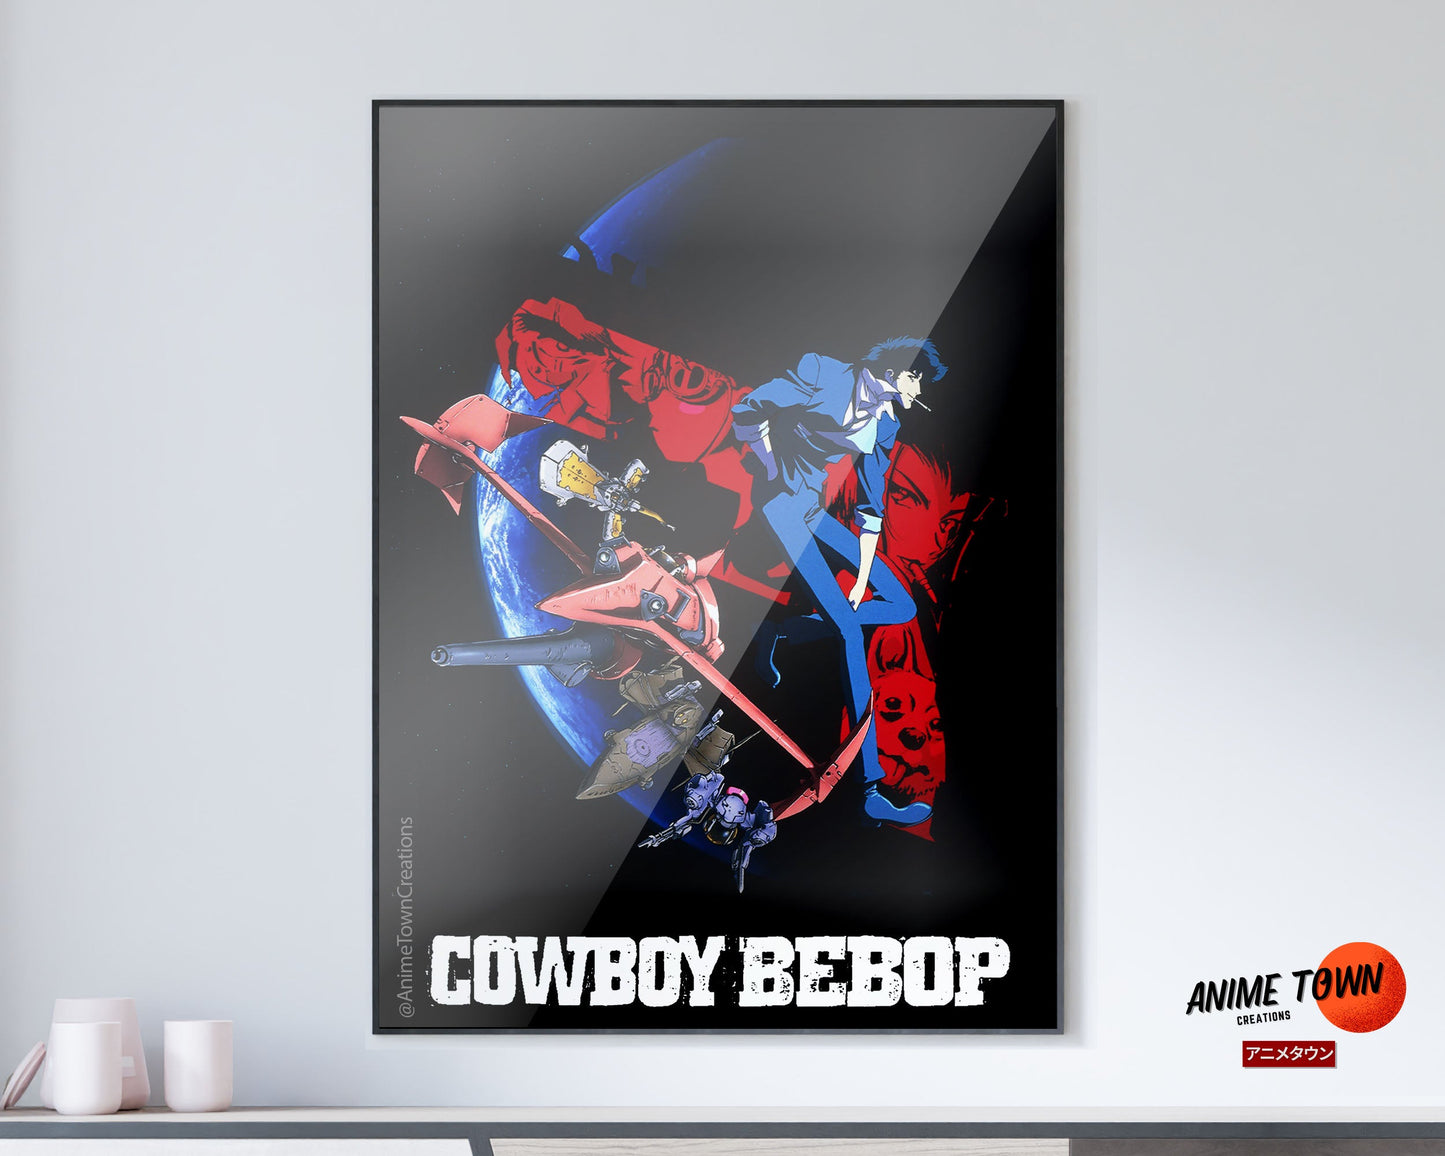 Anime Town Creations Poster Cowboy Bebop Cover 5" x 7" Home Goods - Anime Cowboy Bepop Poster